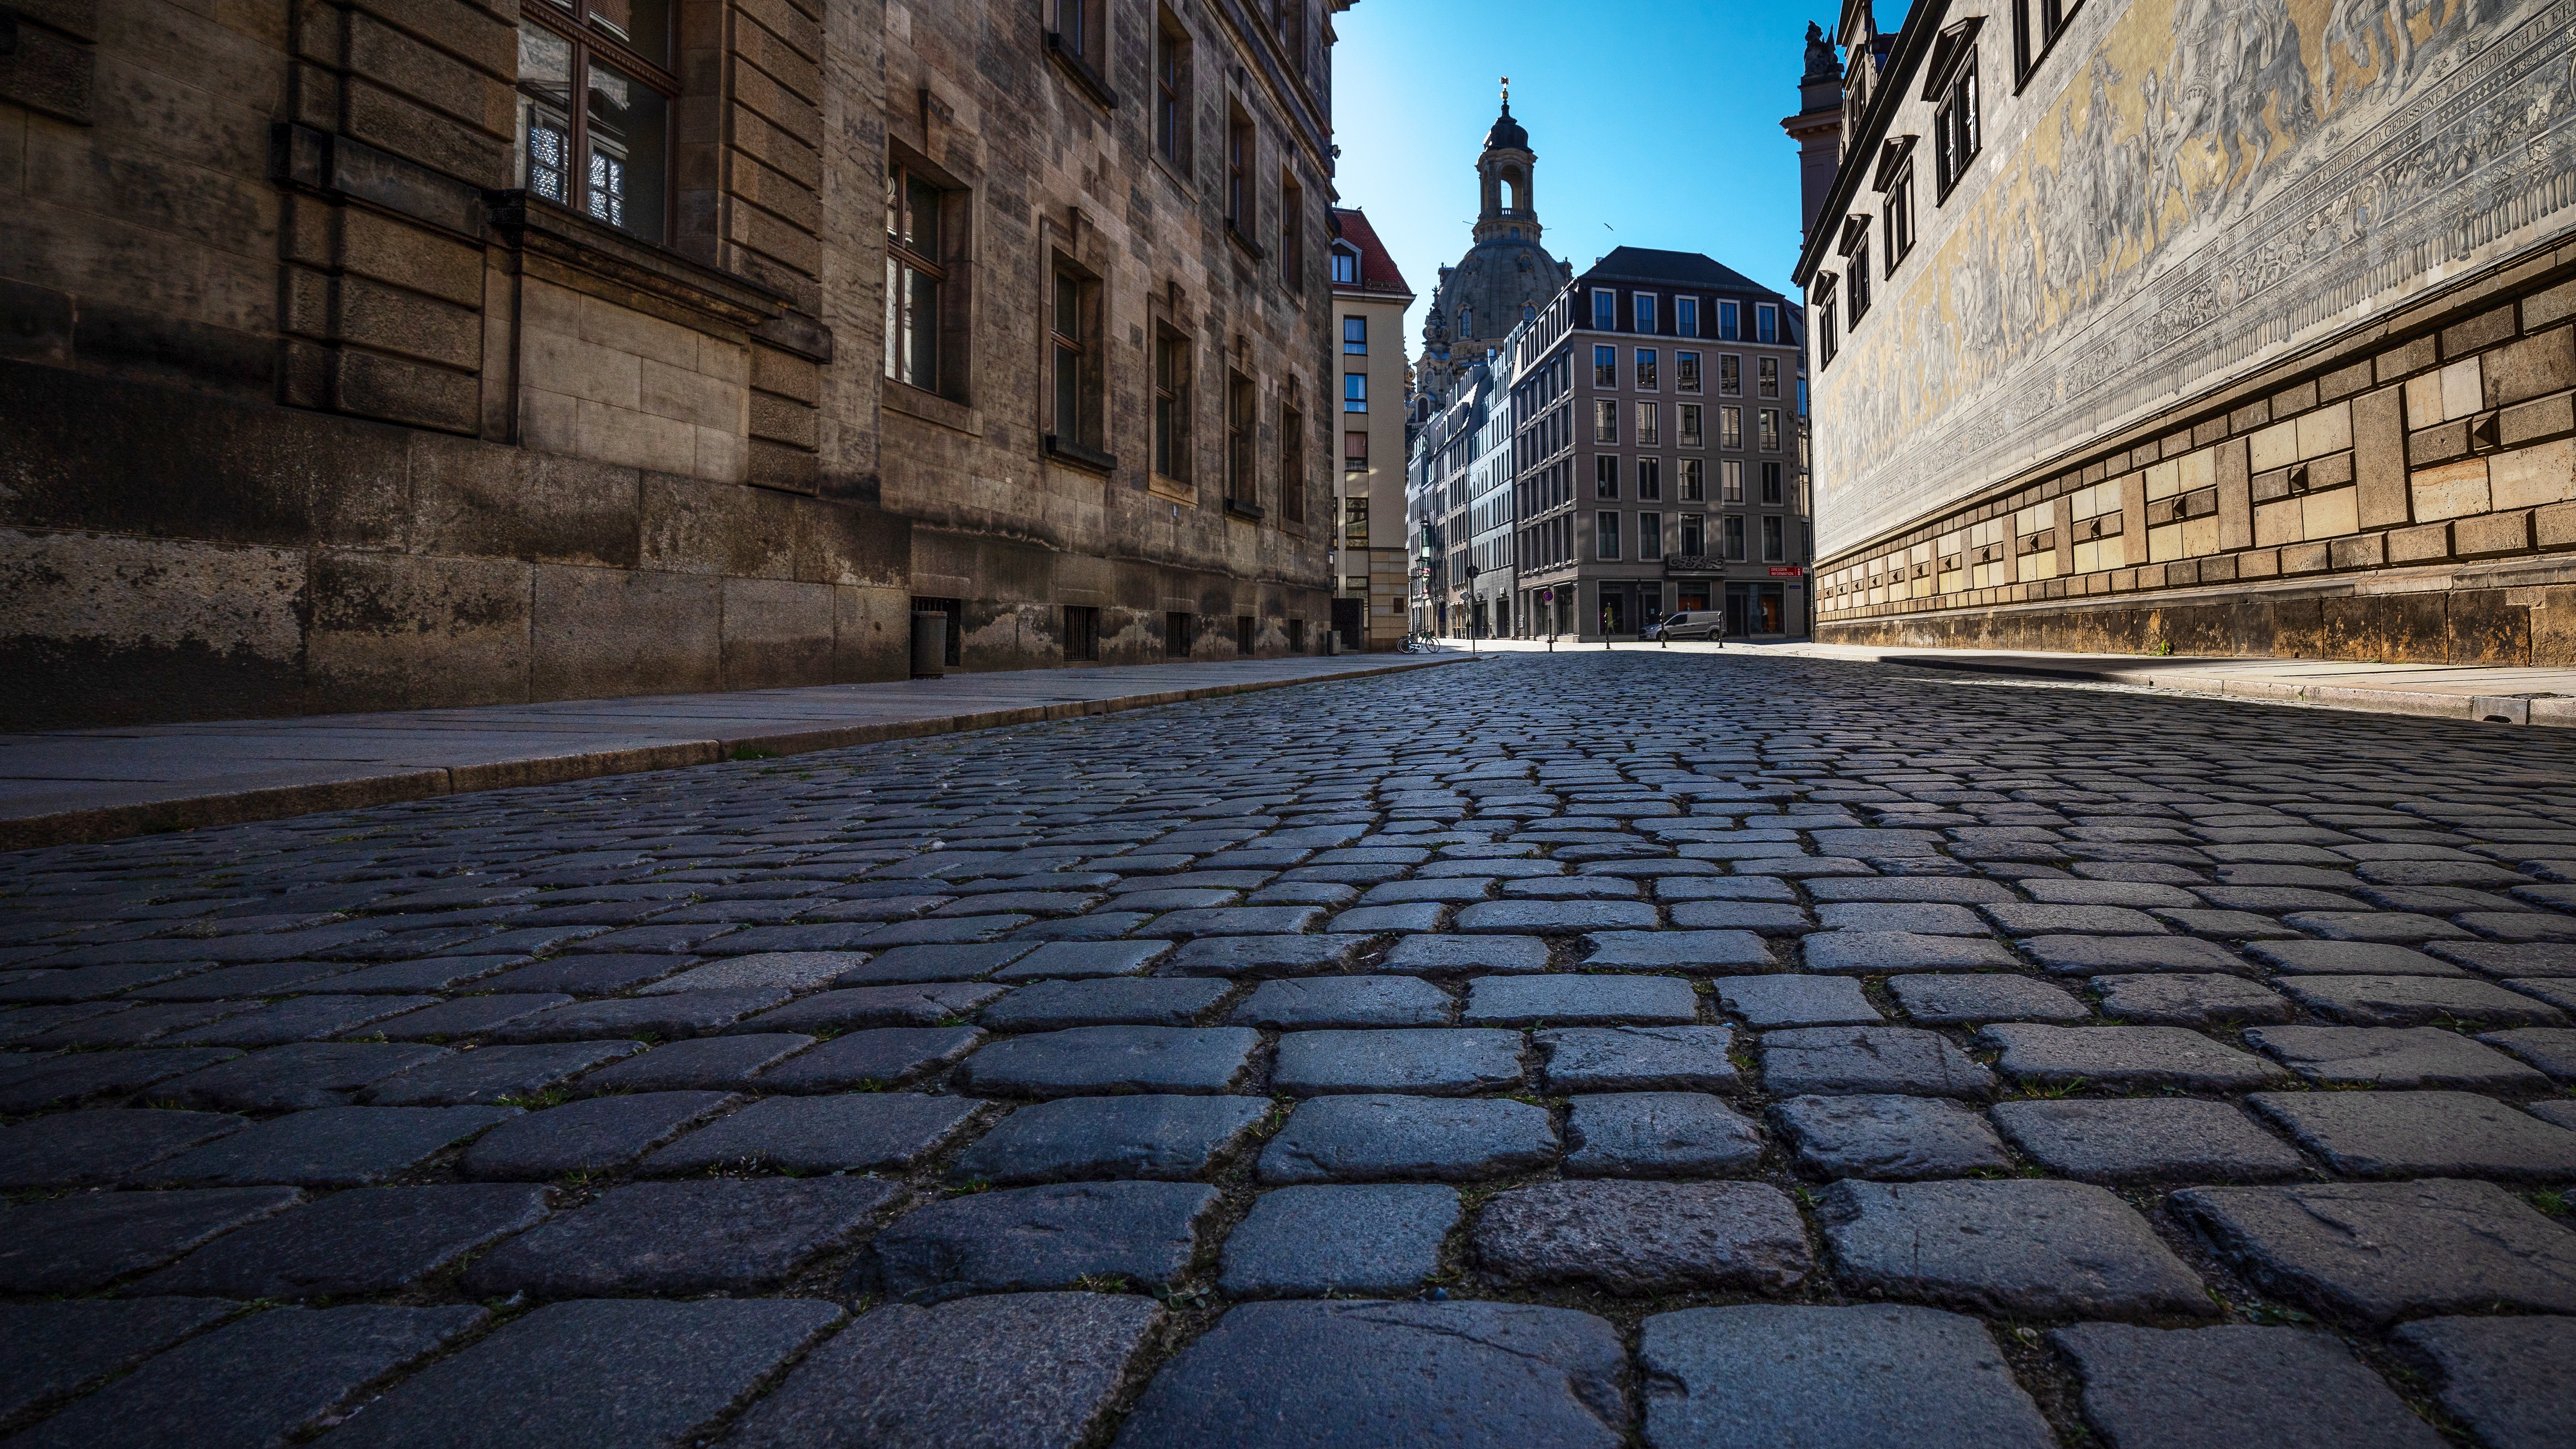 dresden, man made, architecture, building, cities